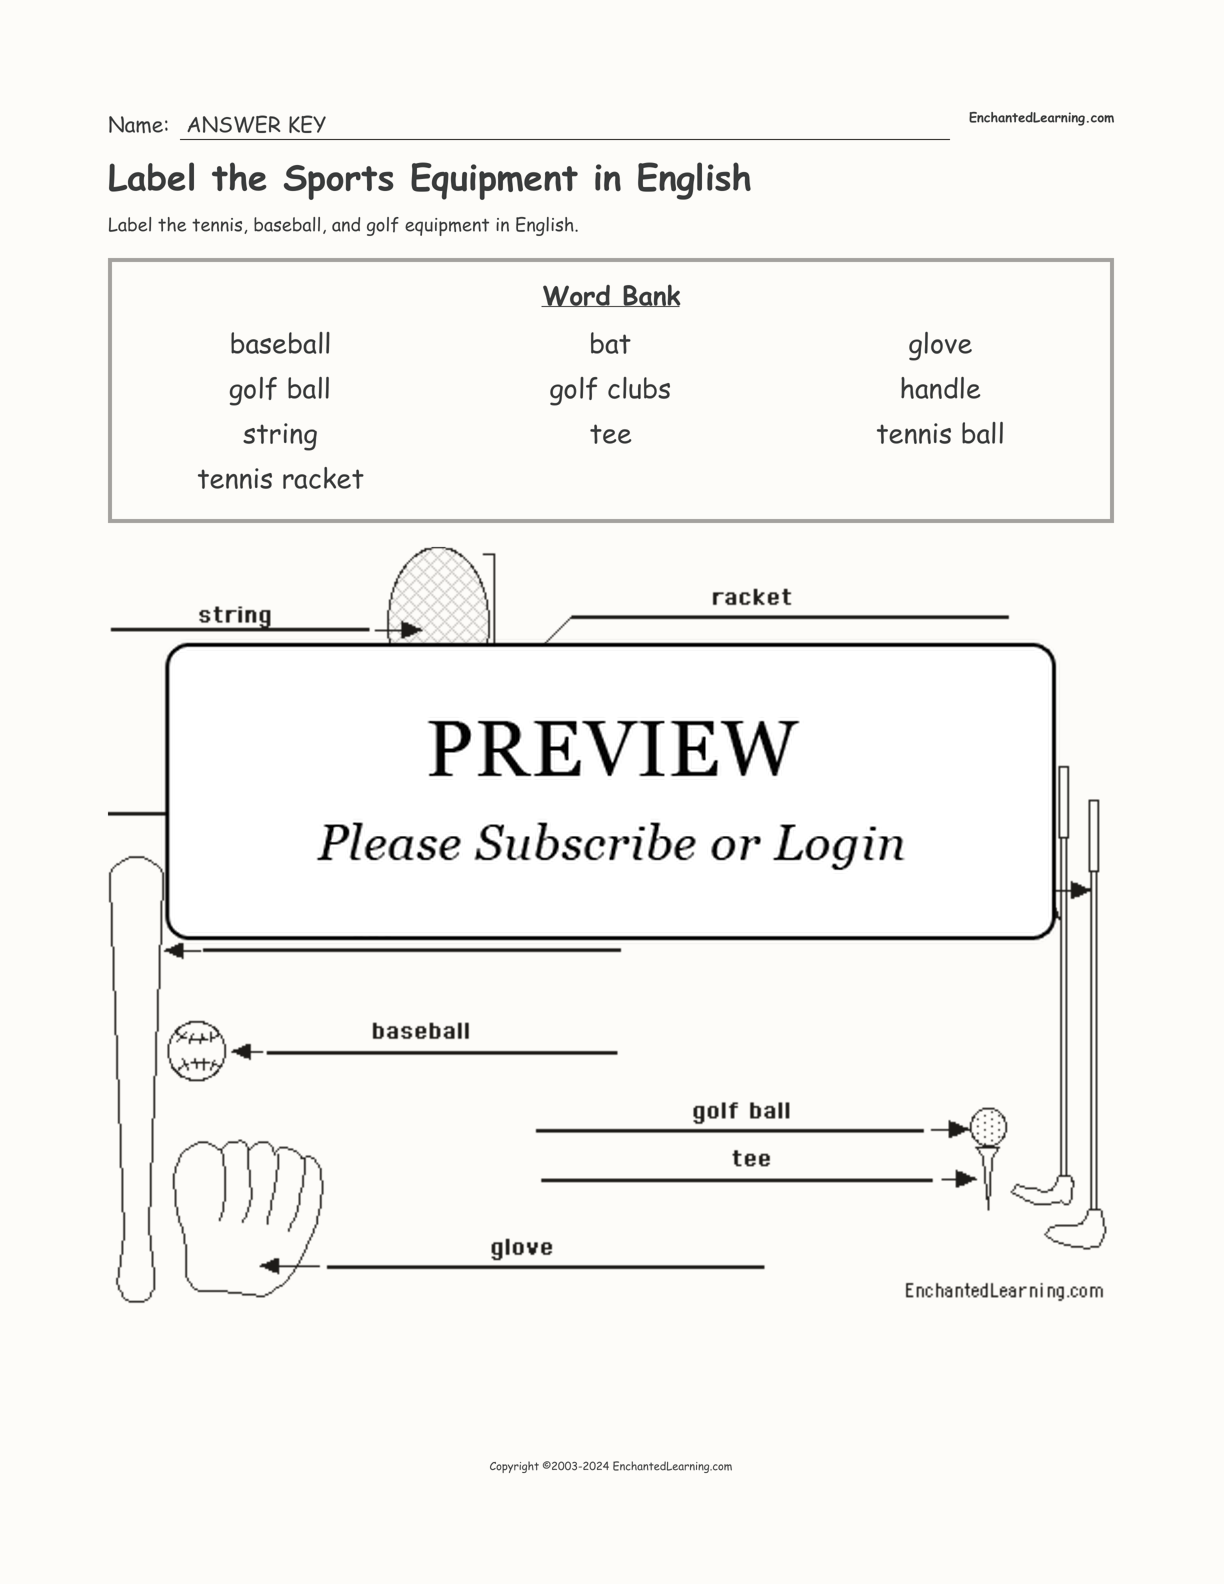 Label the Sports Equipment in English interactive worksheet page 2